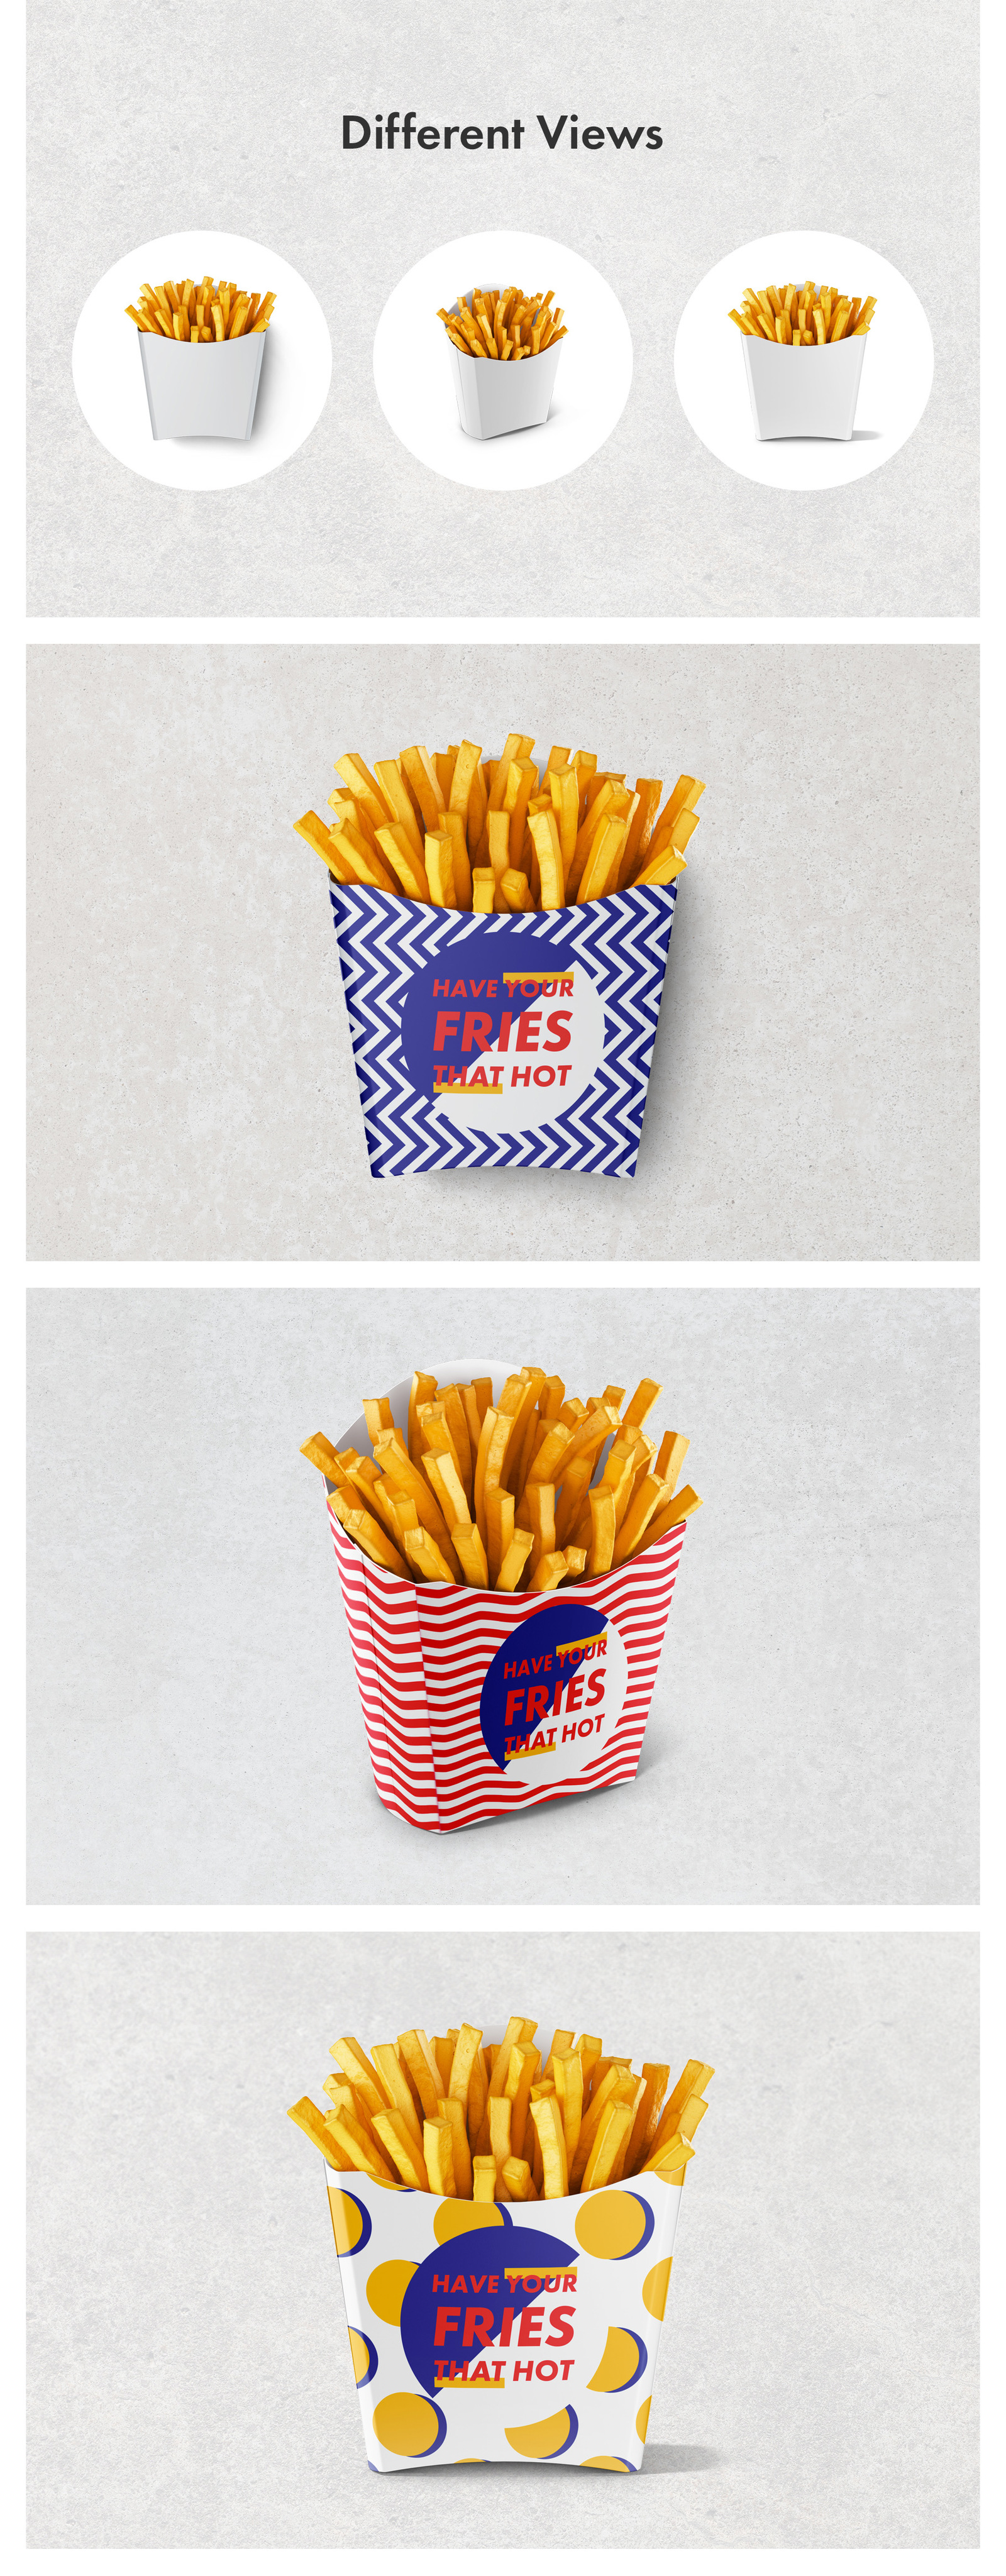 Download French Fries Packaging Mockup Set in Packaging Mockups on ...